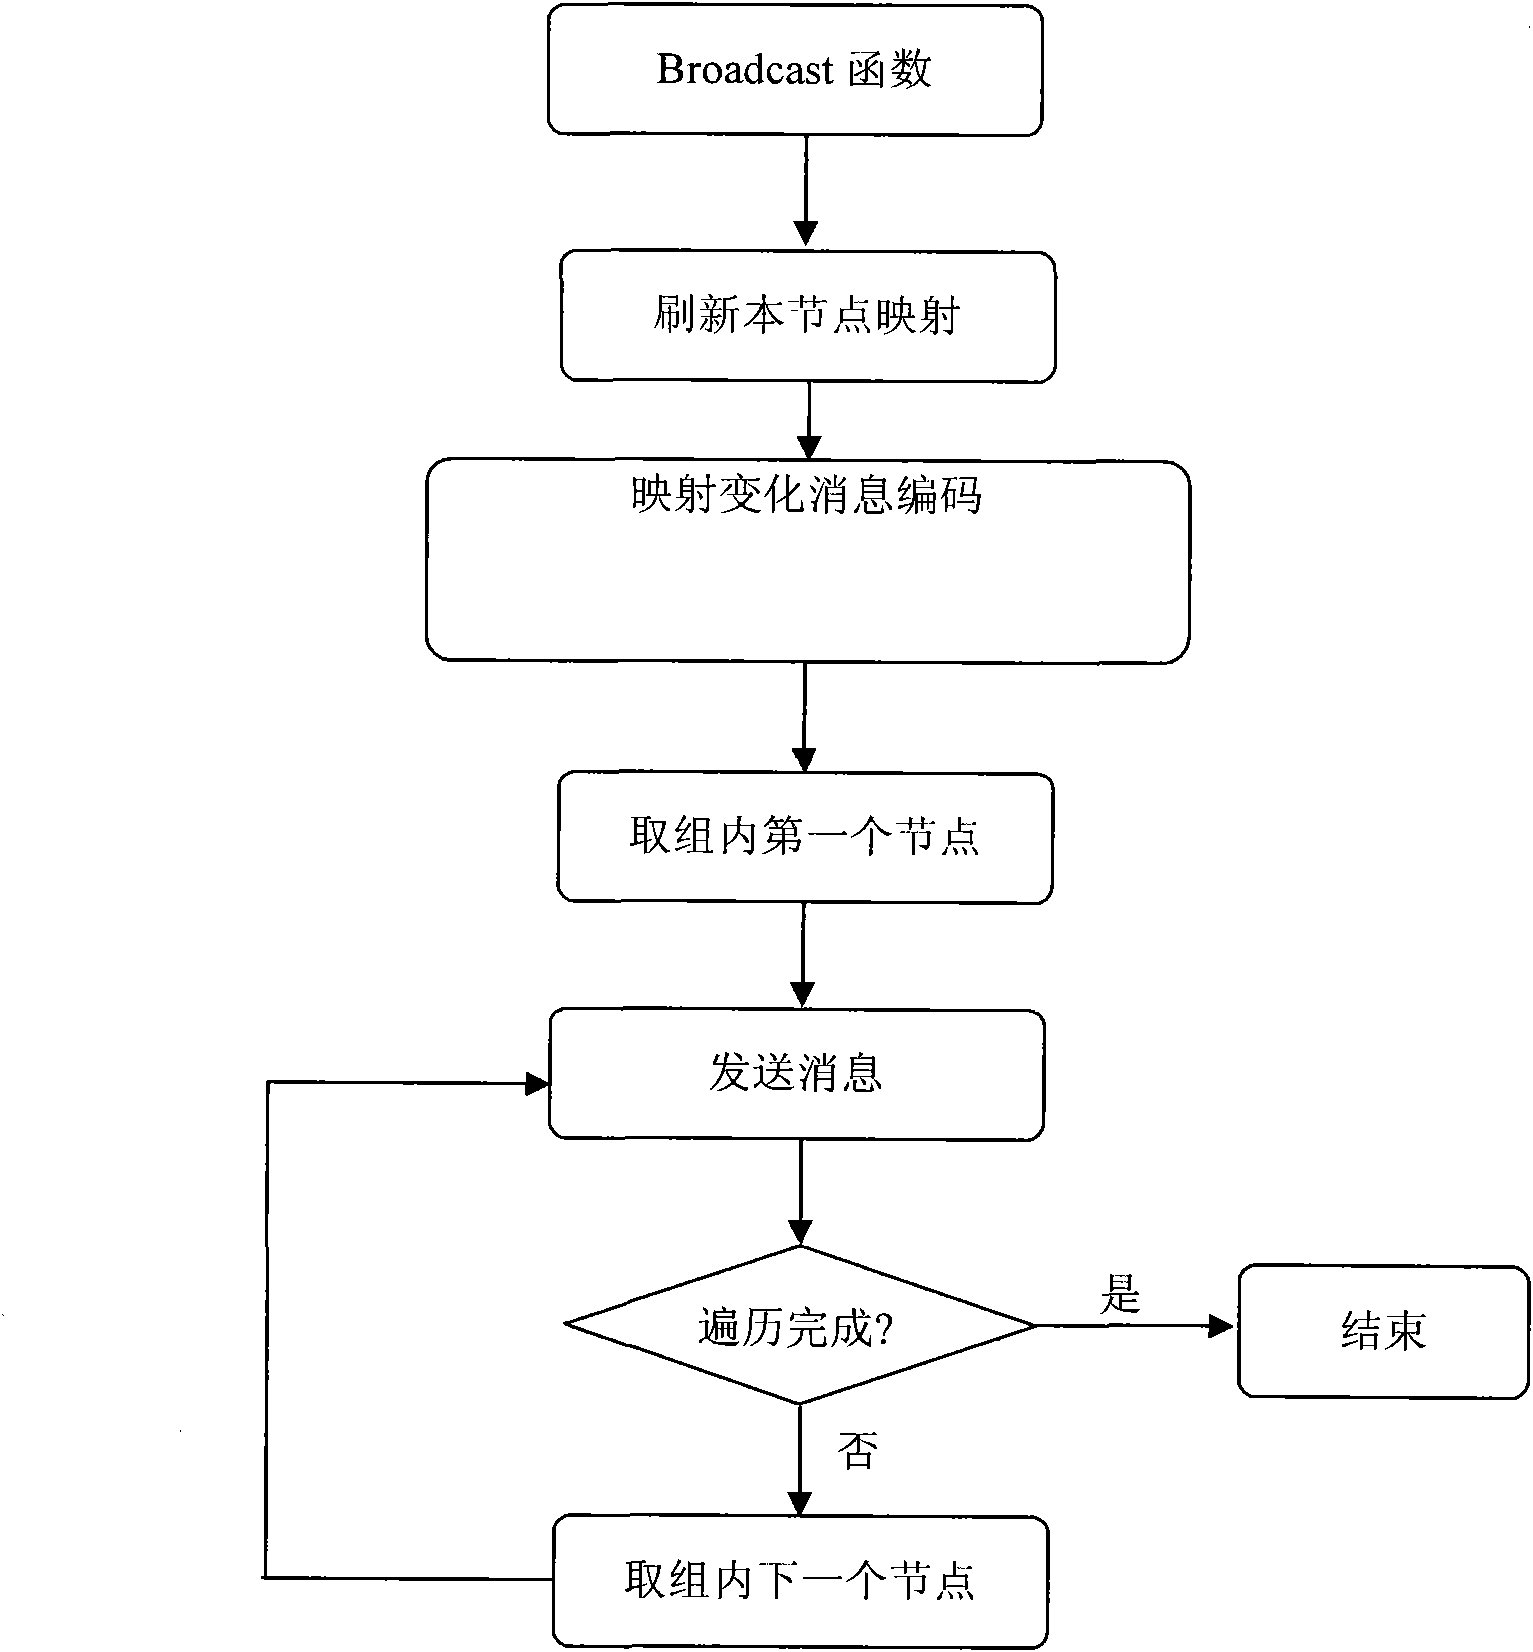 Data transmission sharing method of network topography system based on P2P